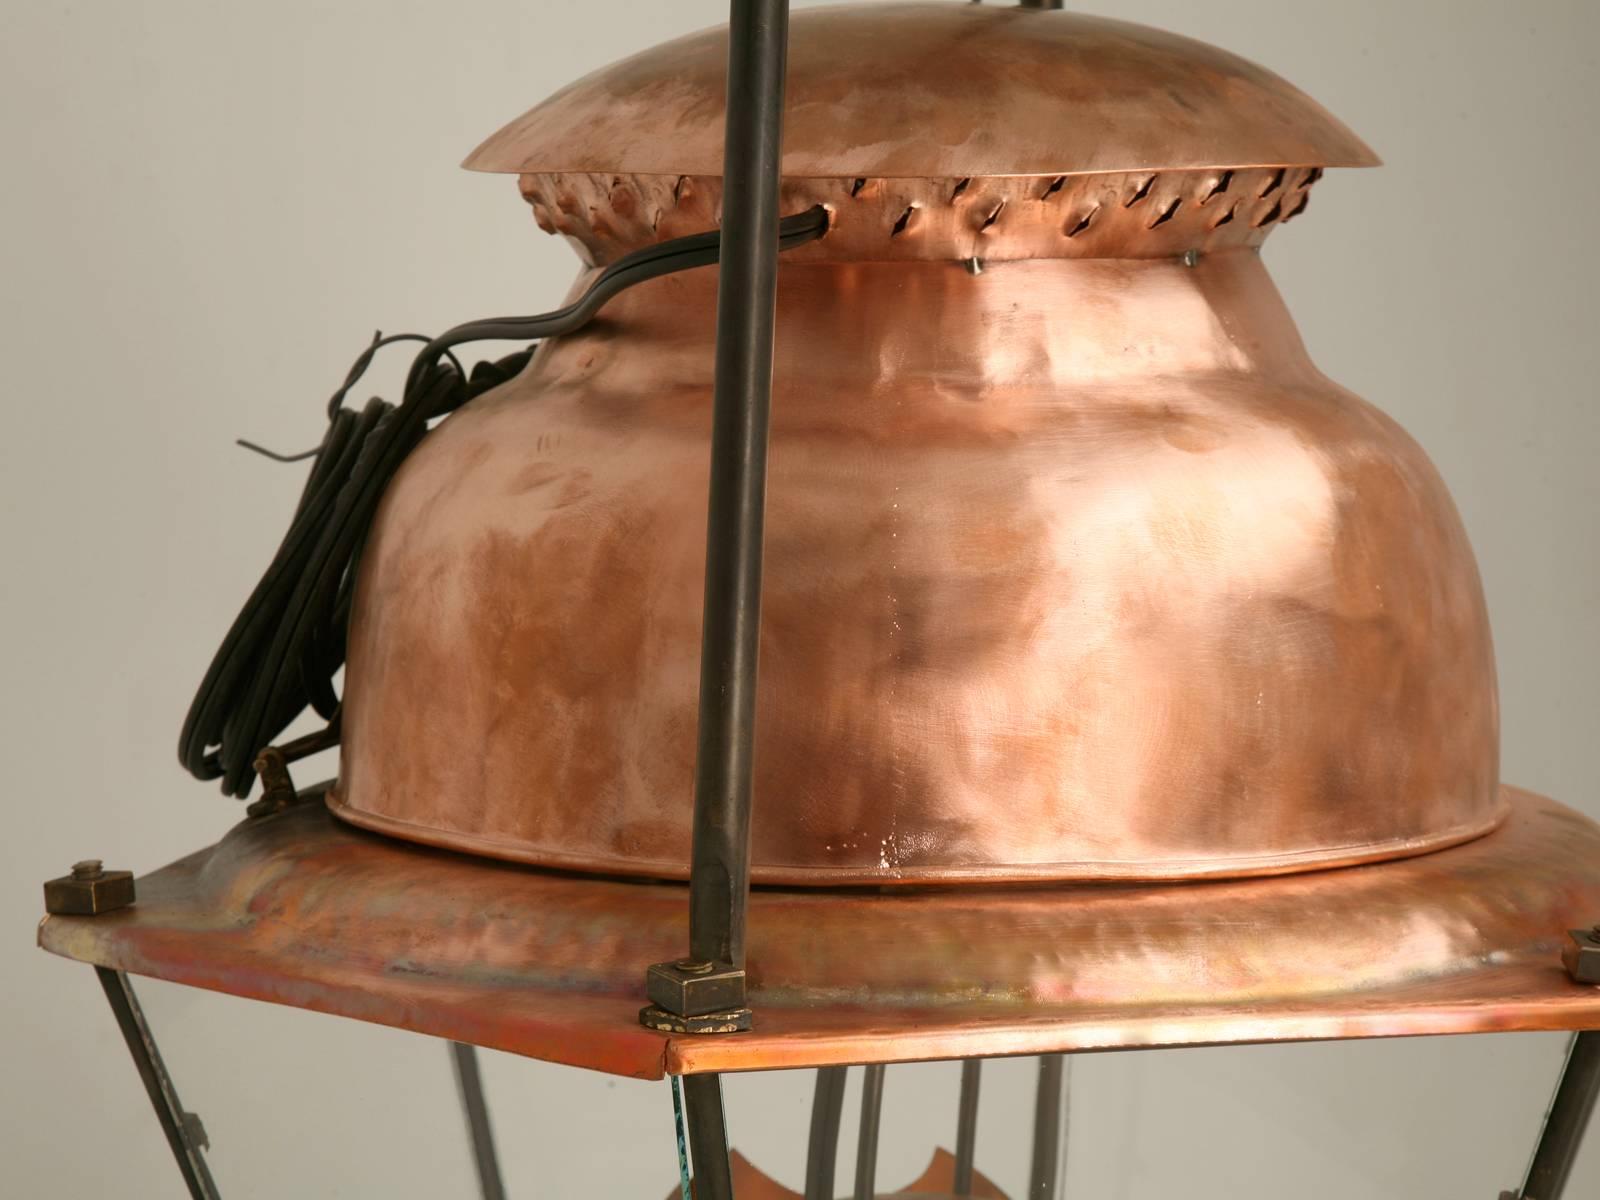 Hand-Crafted French 18th Century Style Copper Lantern with Hand Blown Glass Panes